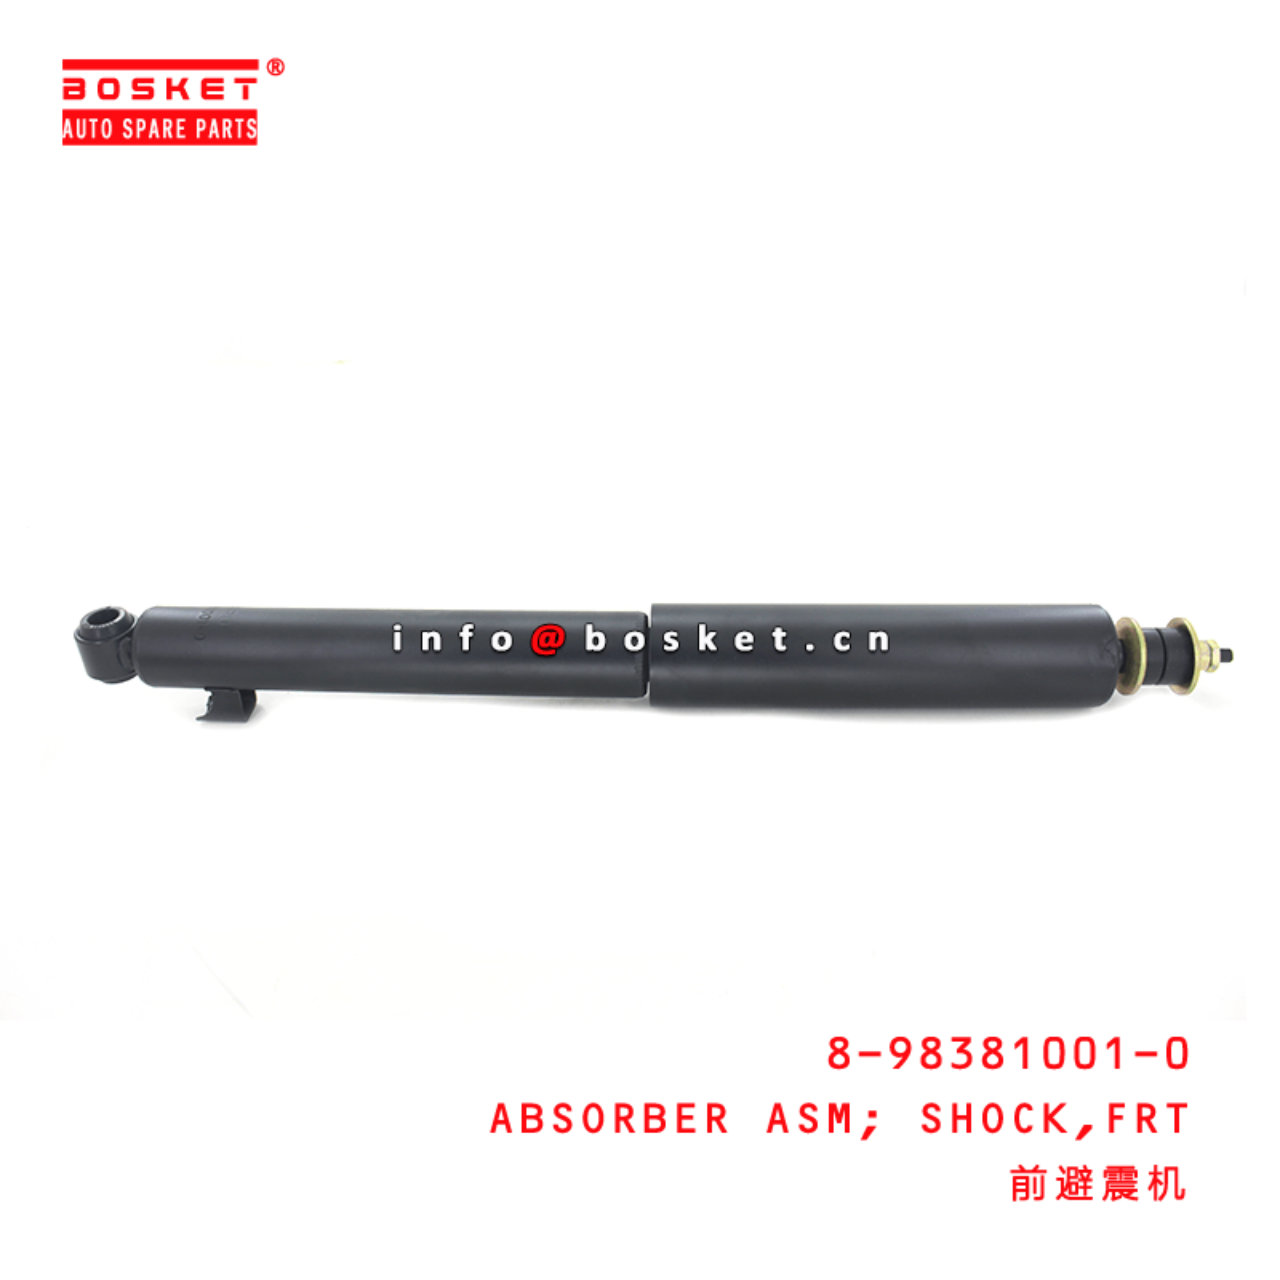 8-98381001-0 Front Shock Absorber Assembly 8983810010 Suitable for 